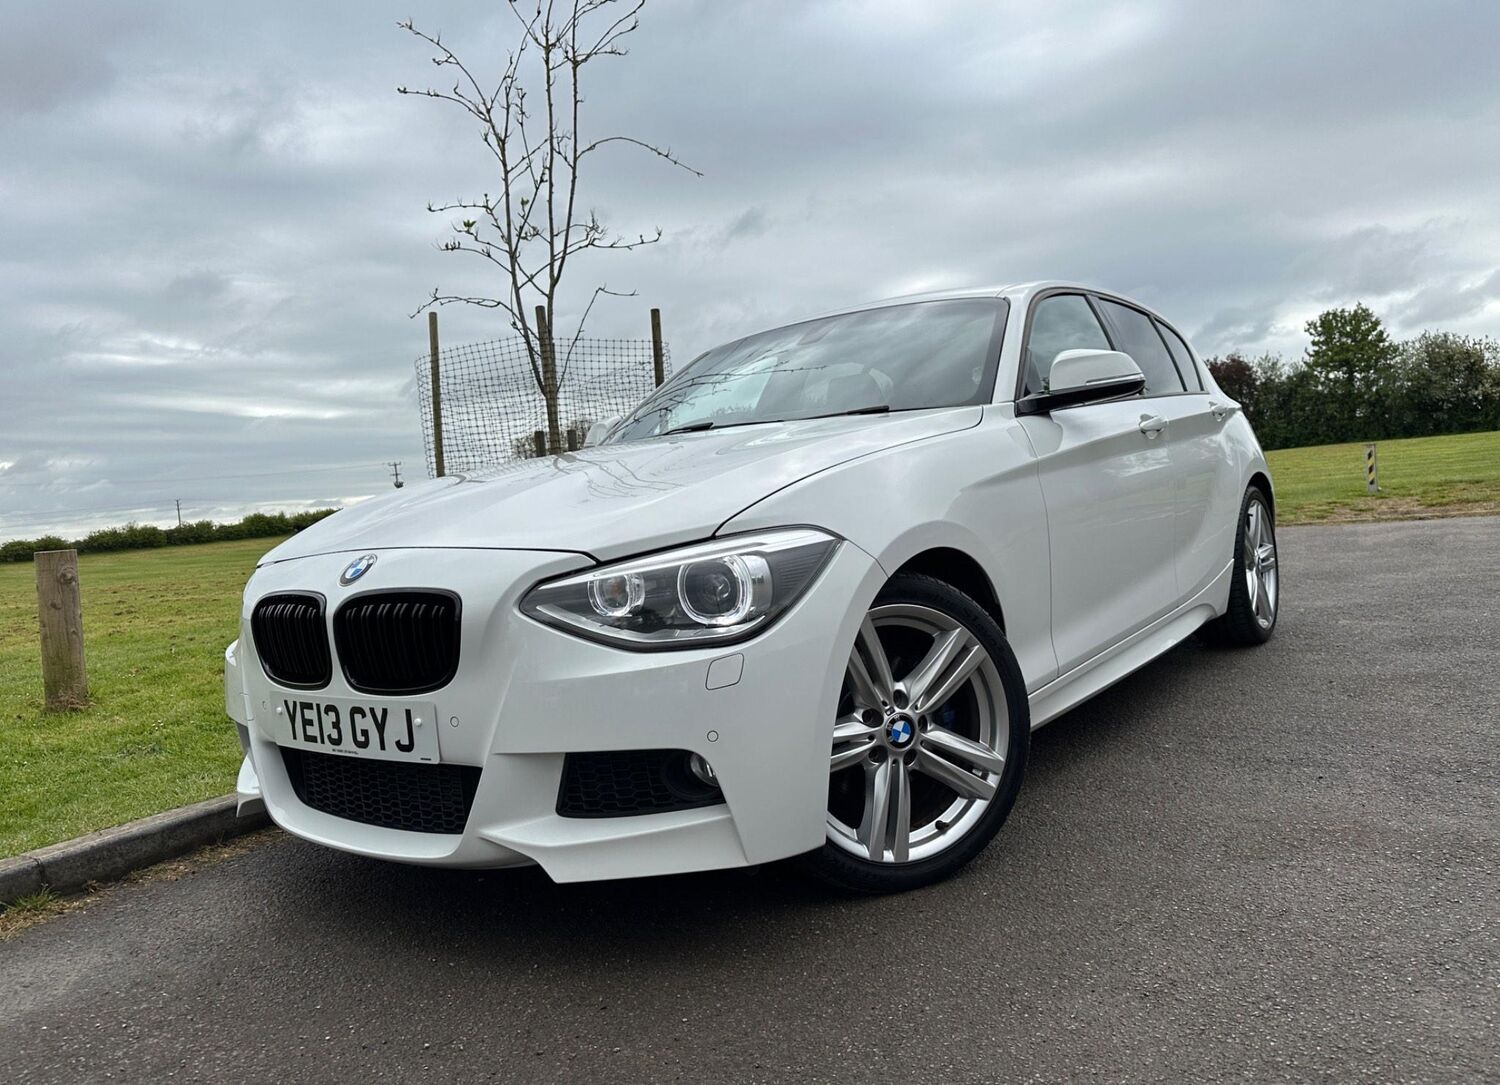 Compare BMW 1 Series 2.0 120D M Sport Euro 5 Ss 2013 YE13GYJ White